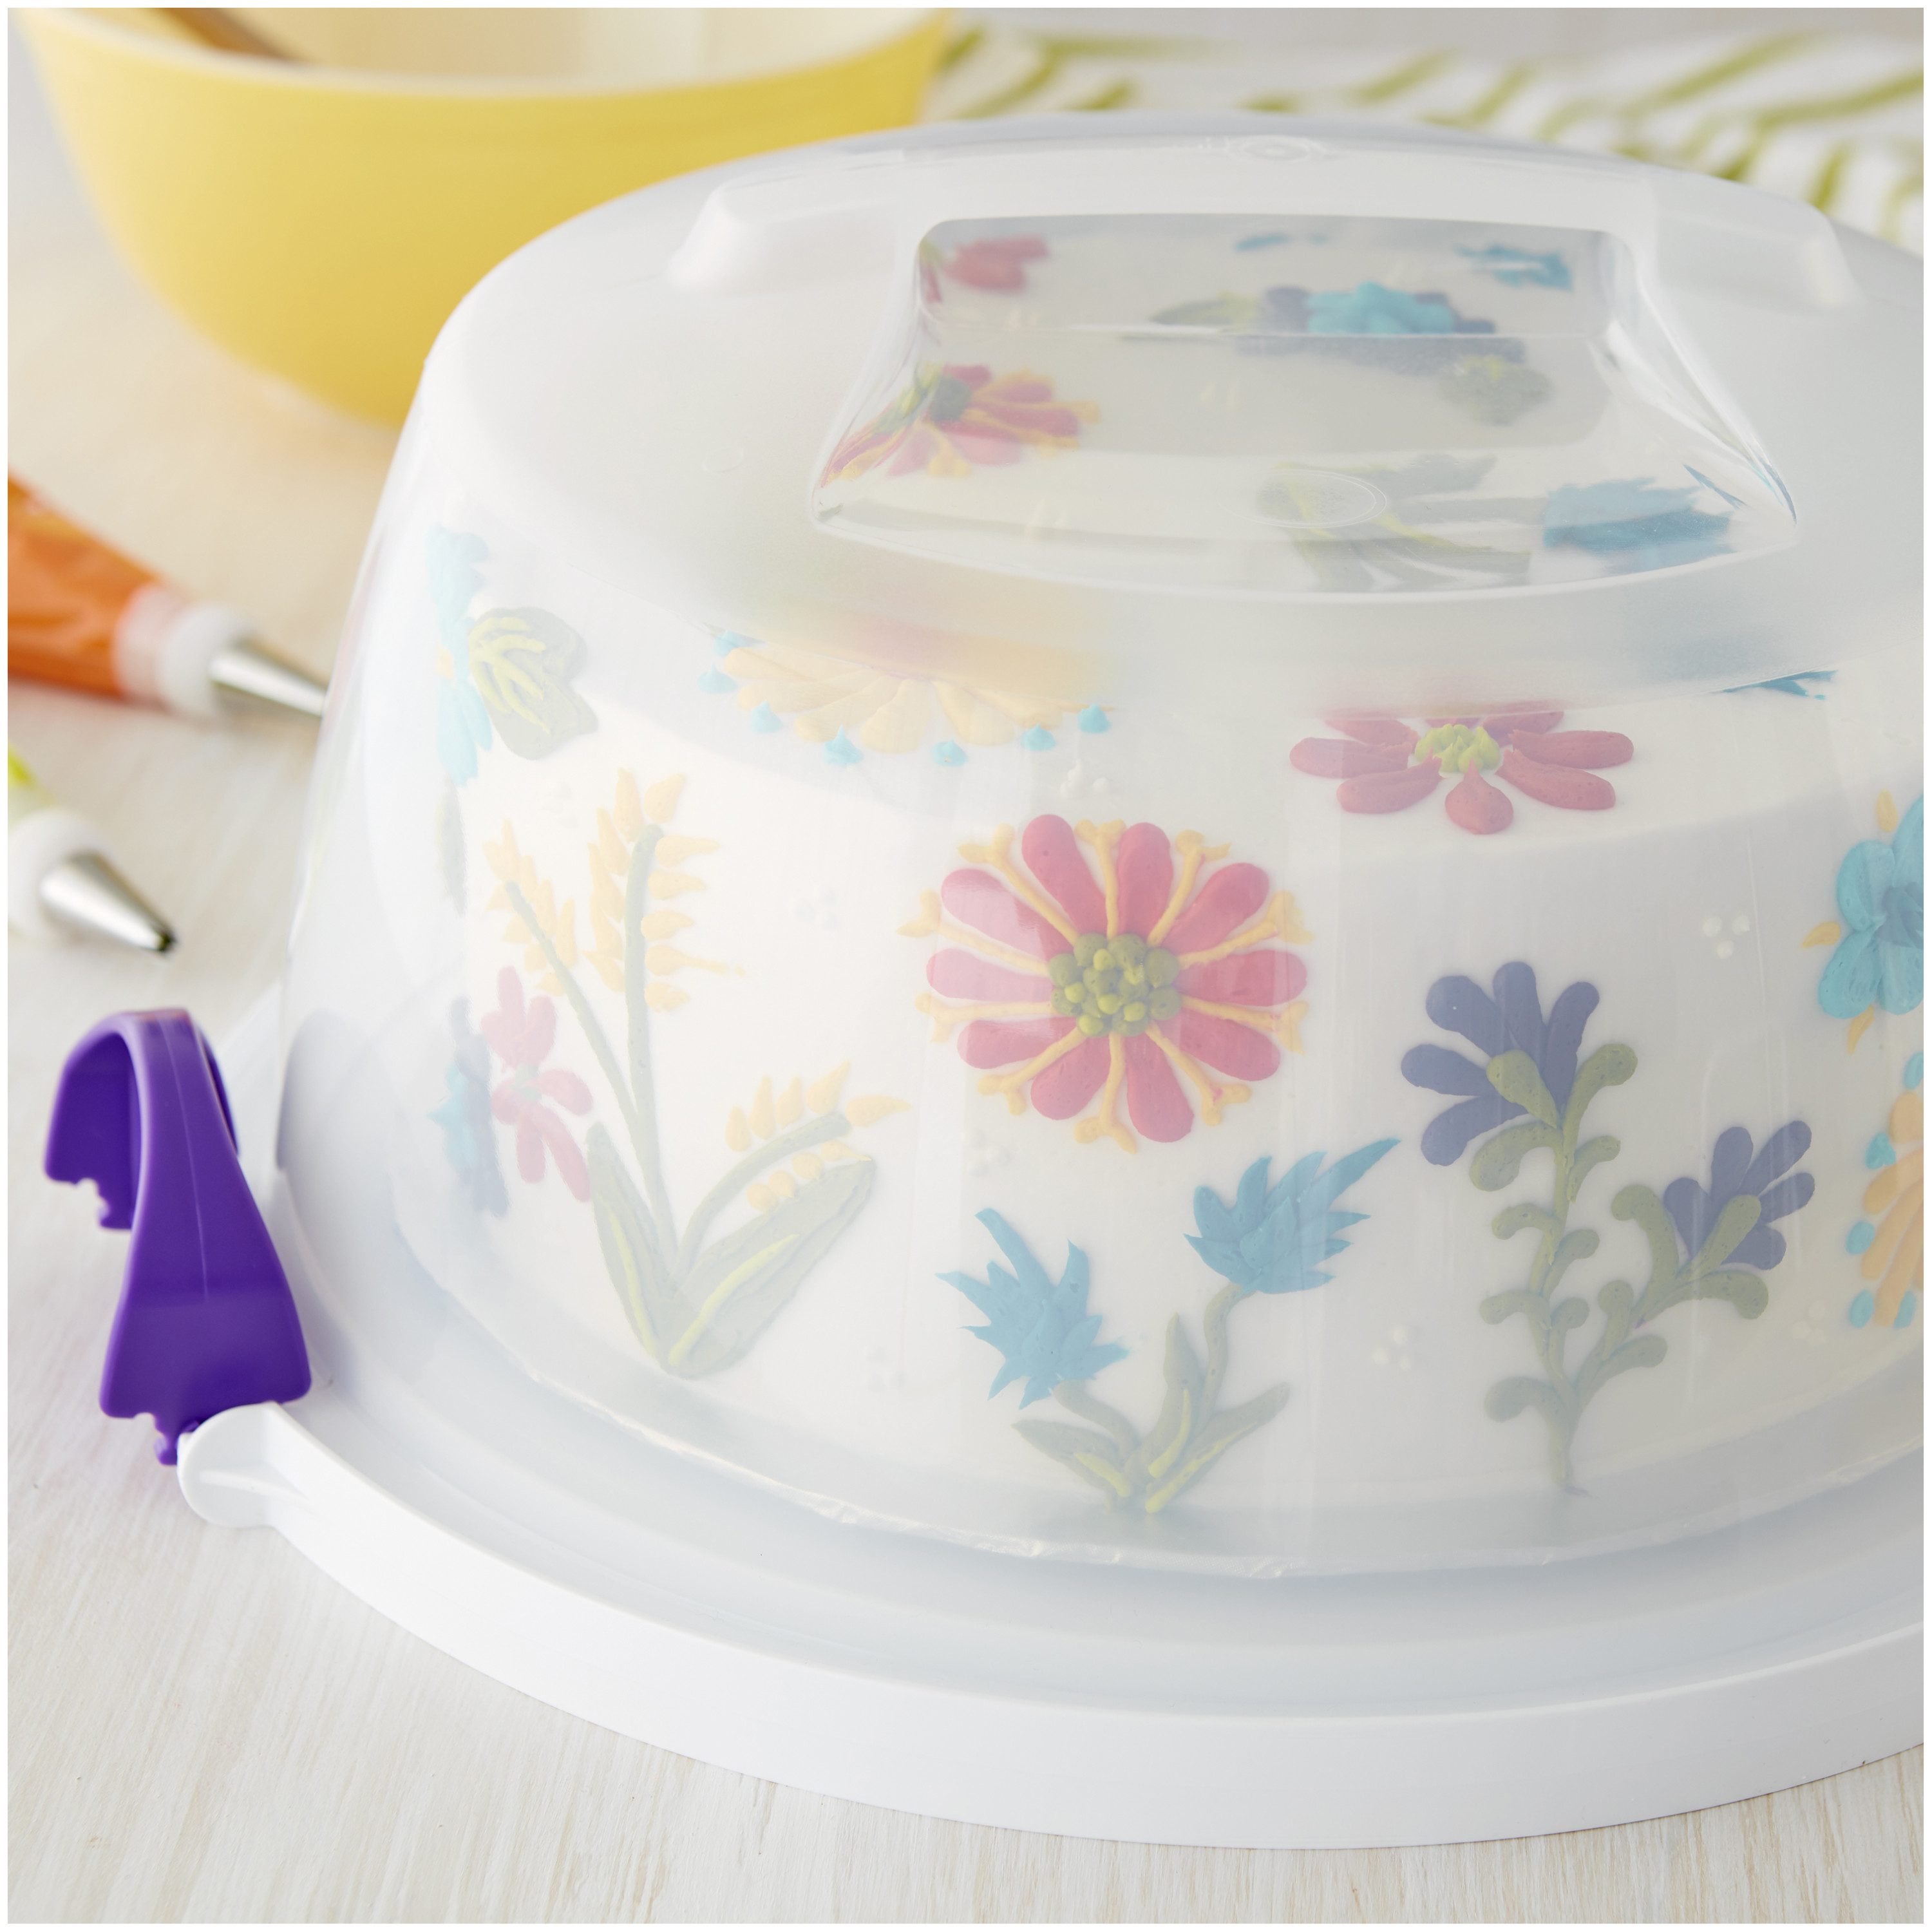 Wilton Cake and Cupcake Carrier, Fits 10 inch Cake or 13 Standard Cupcakes, 2.07 oz. - image 5 of 5